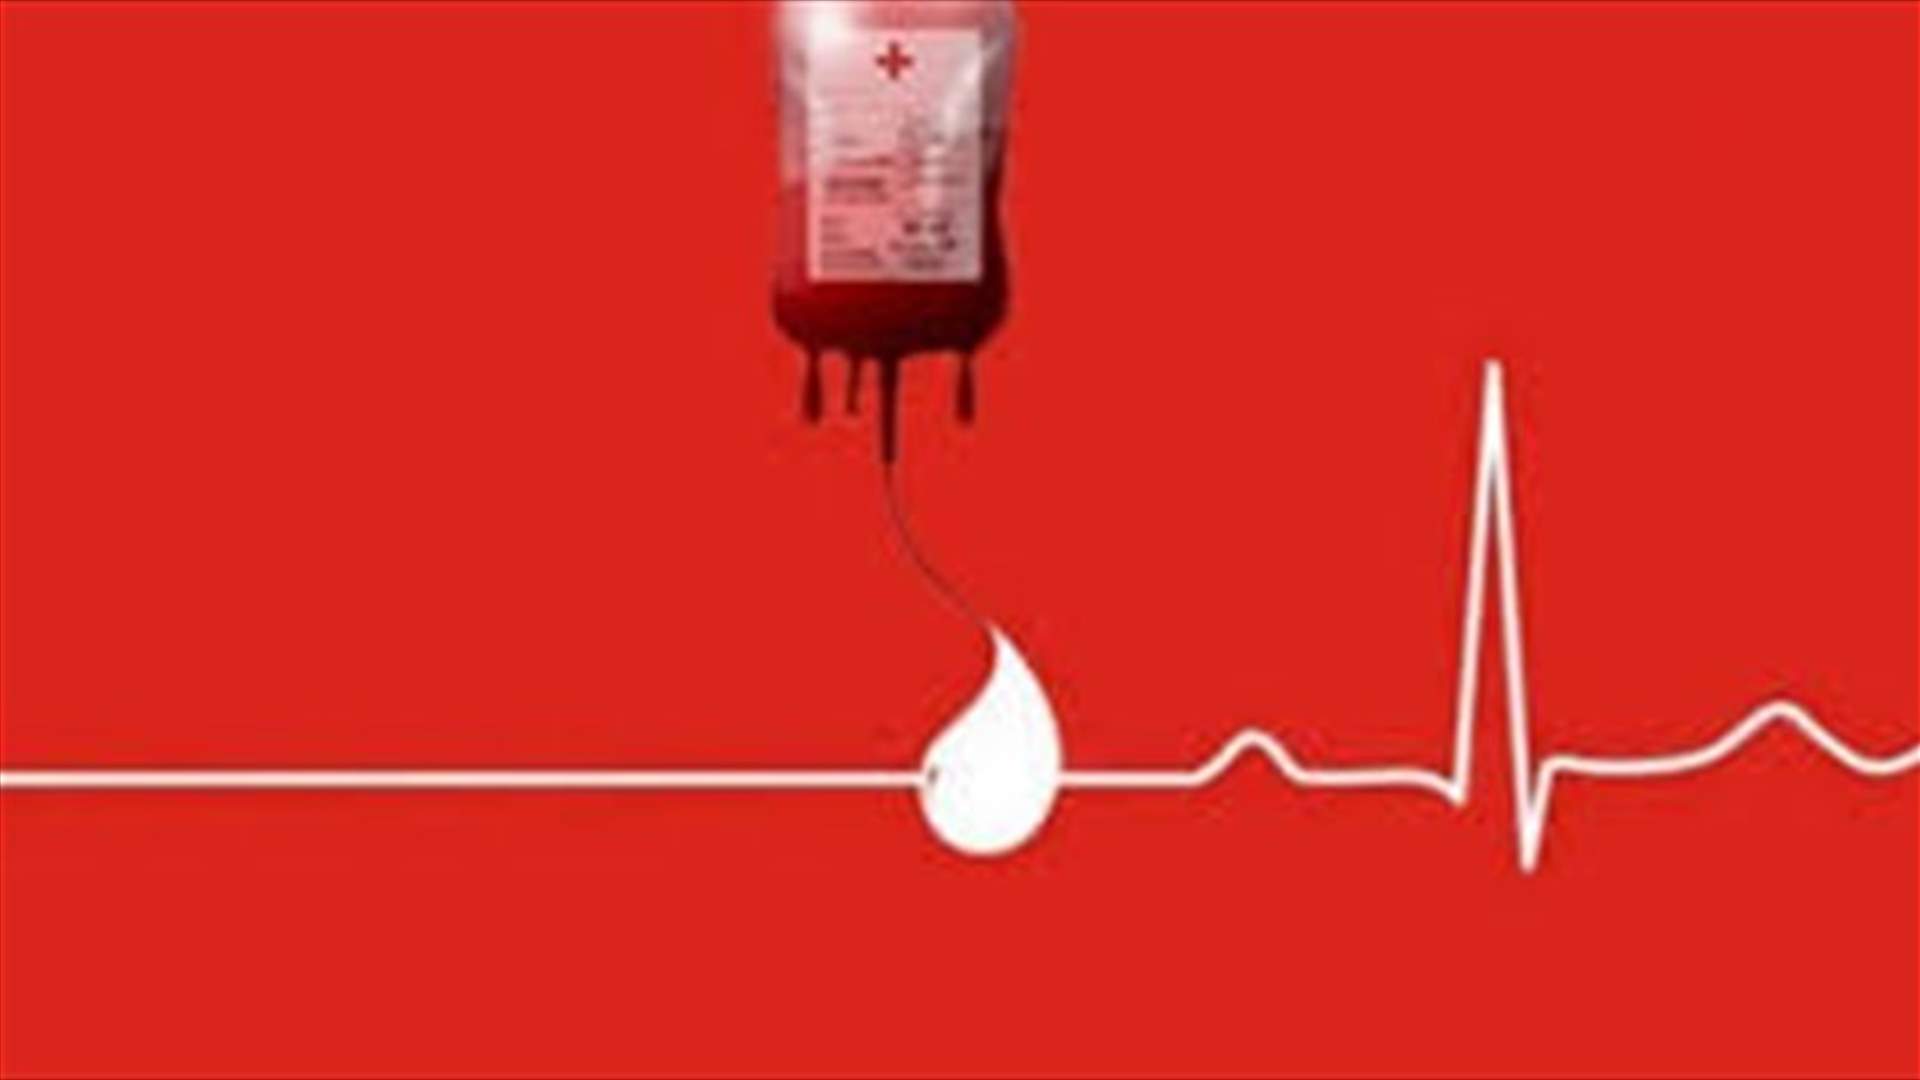 A patient urgently needs A+ blood type. To donate at Lebanese Red Cross - Jounieh, please call: 76818819